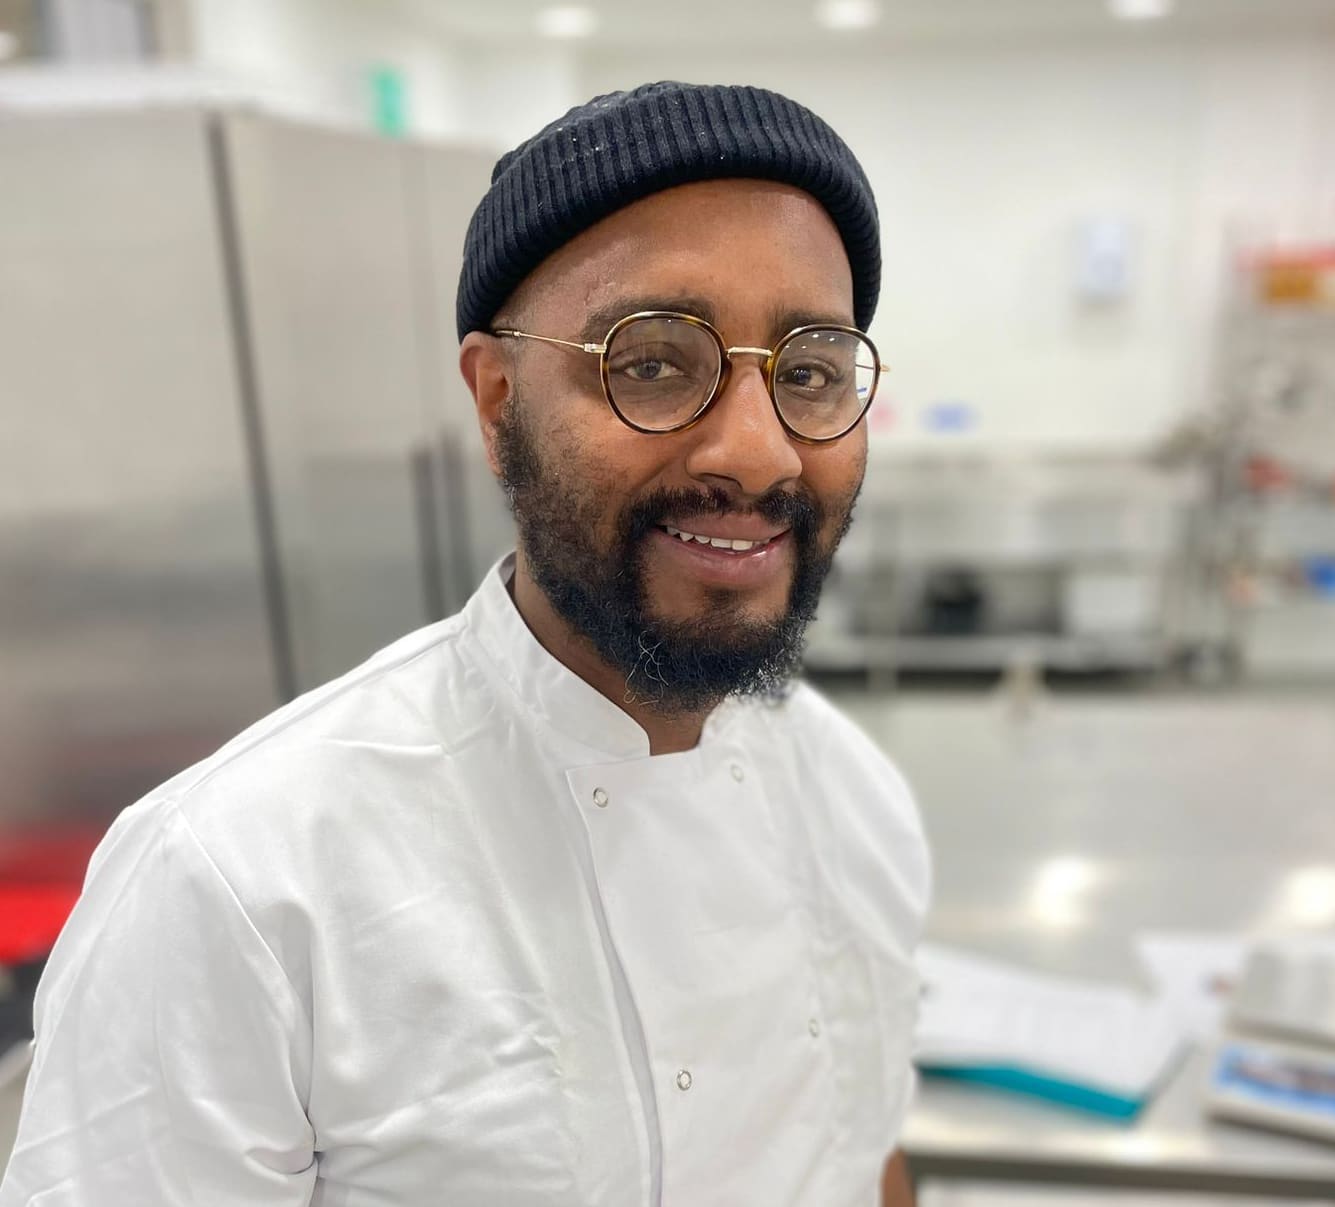 Head of Pastry Quebe with beanie, glasses and chef shirt looking into the camera smiling